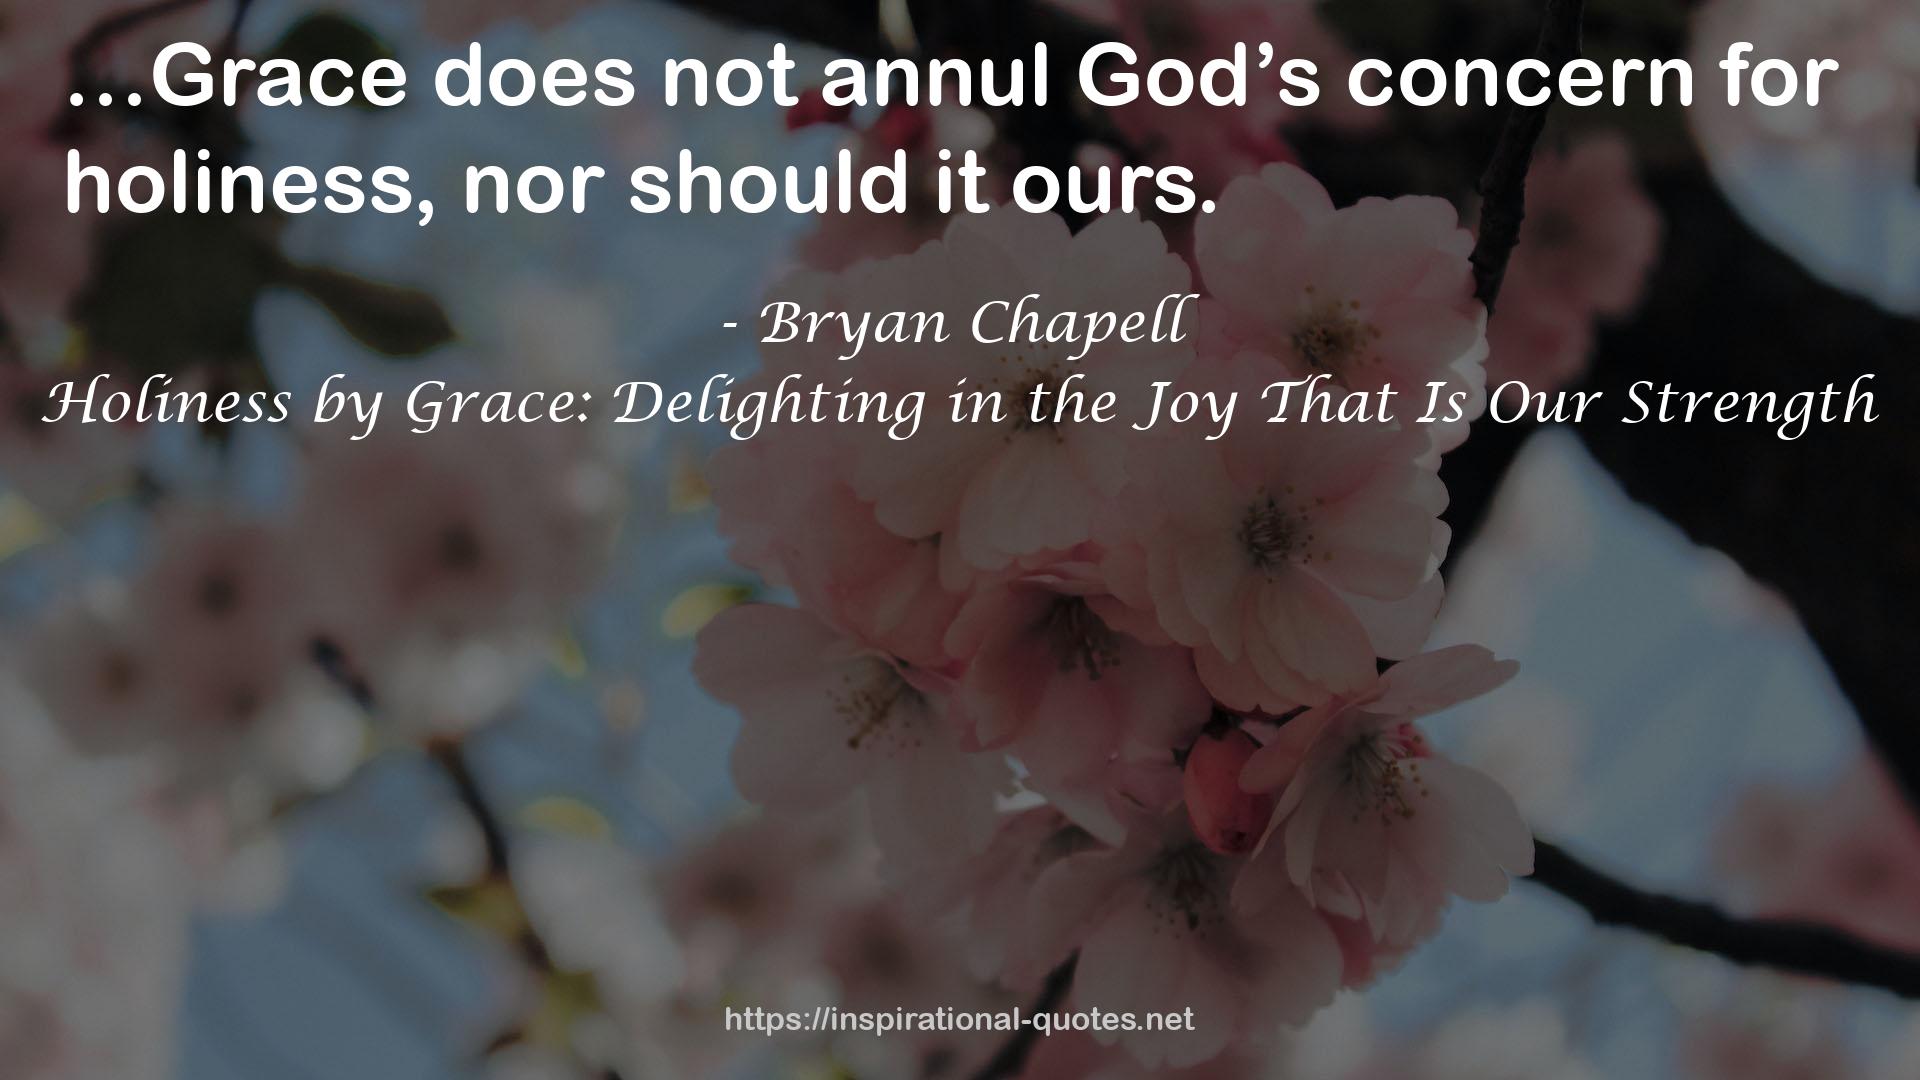 Holiness by Grace: Delighting in the Joy That Is Our Strength QUOTES